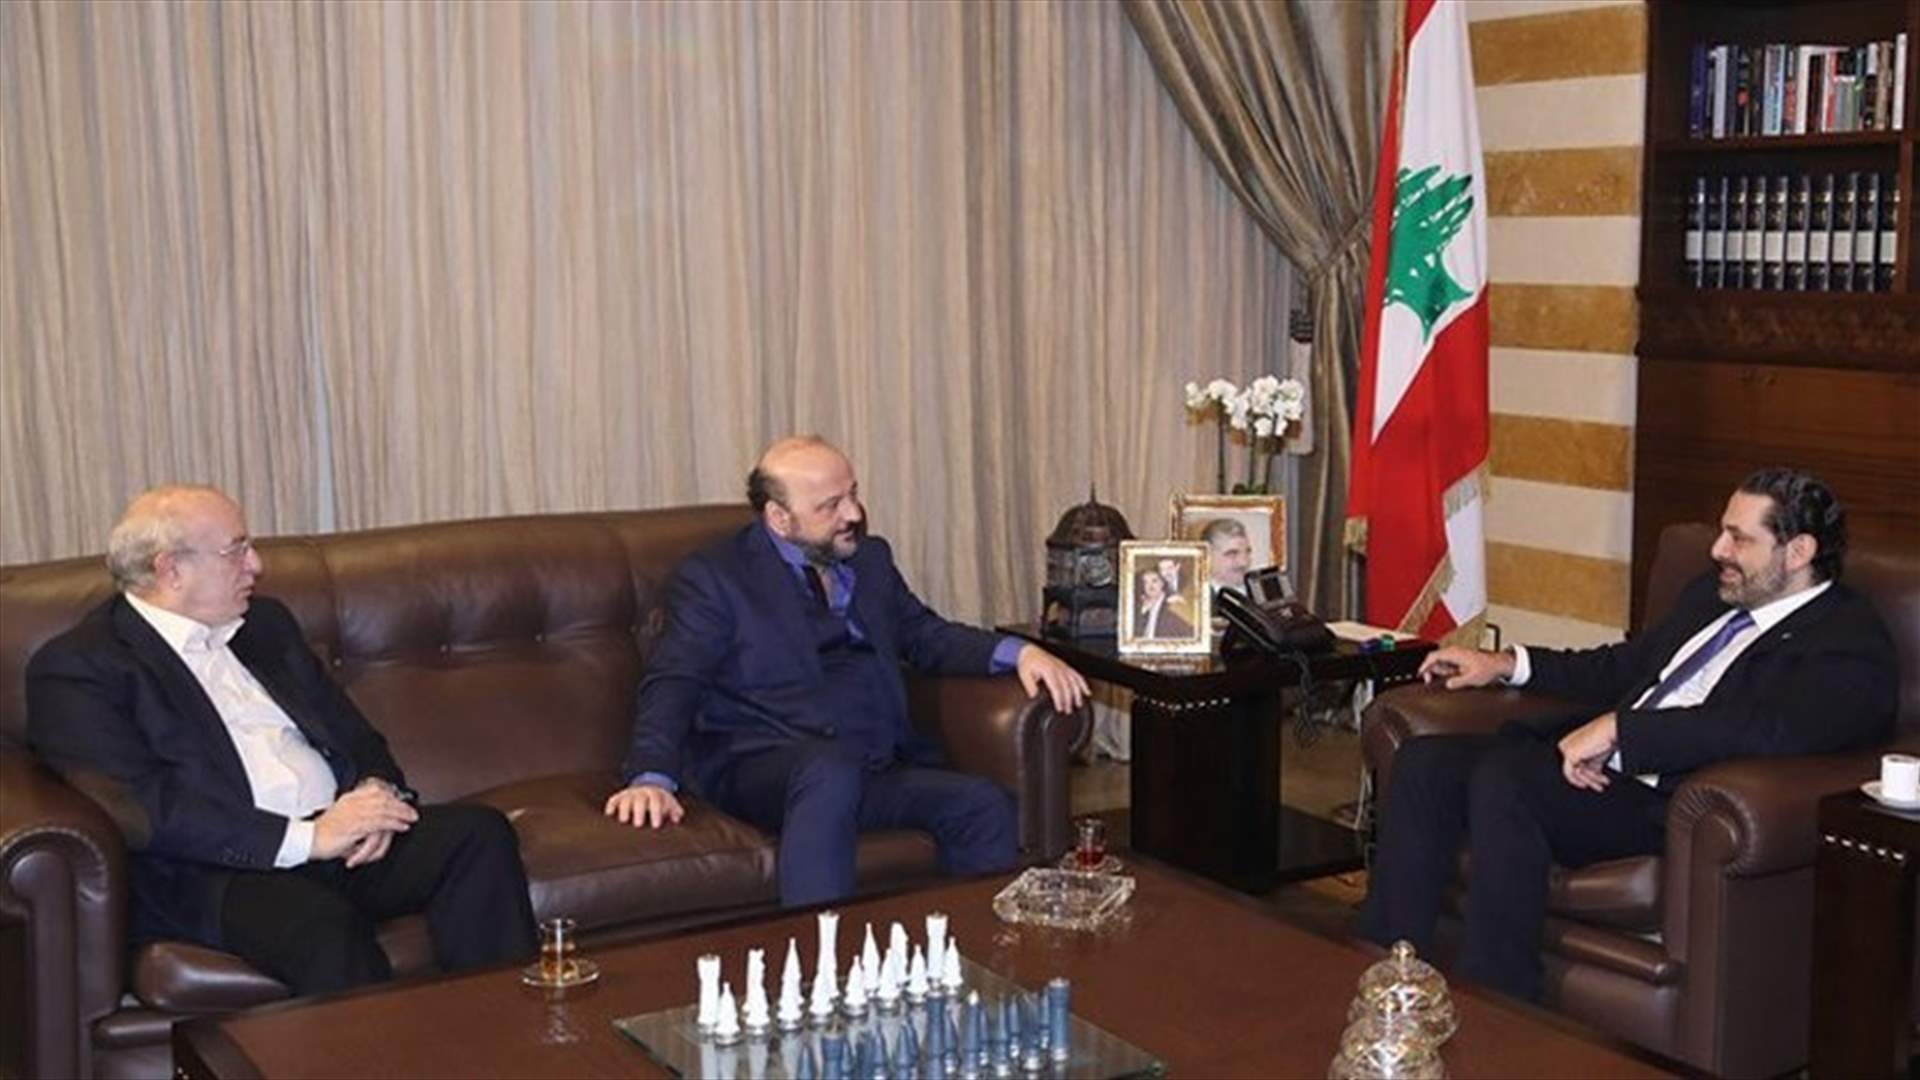 Hariri discusses governmental matters with Riachi and Abou Faour